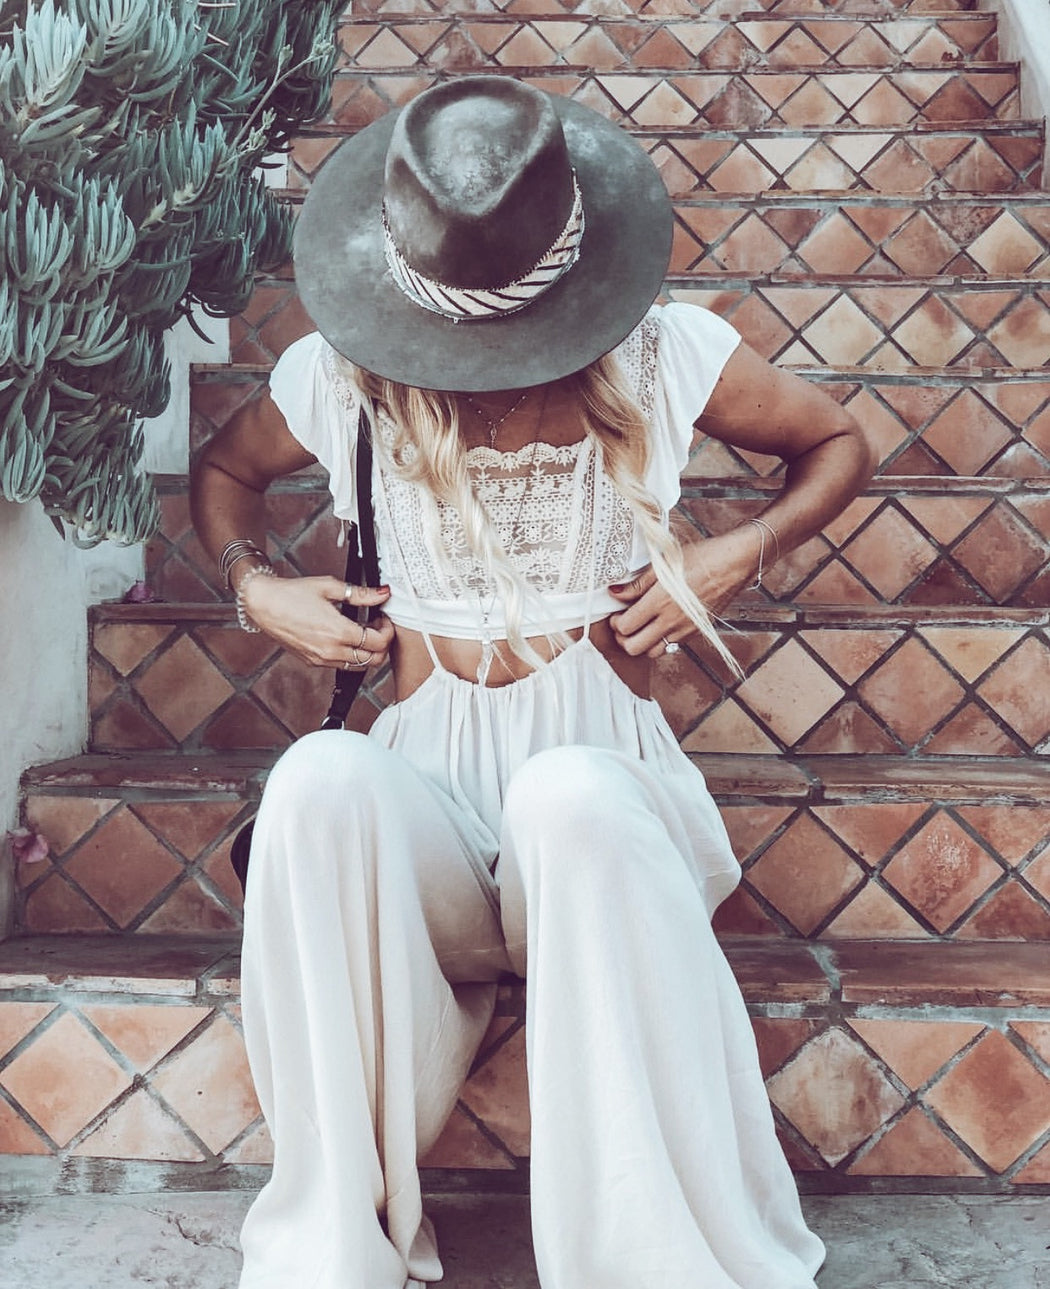 Easy Breezy Beach JumpsuitJumpsuits & Rompers - Bohemian Groove